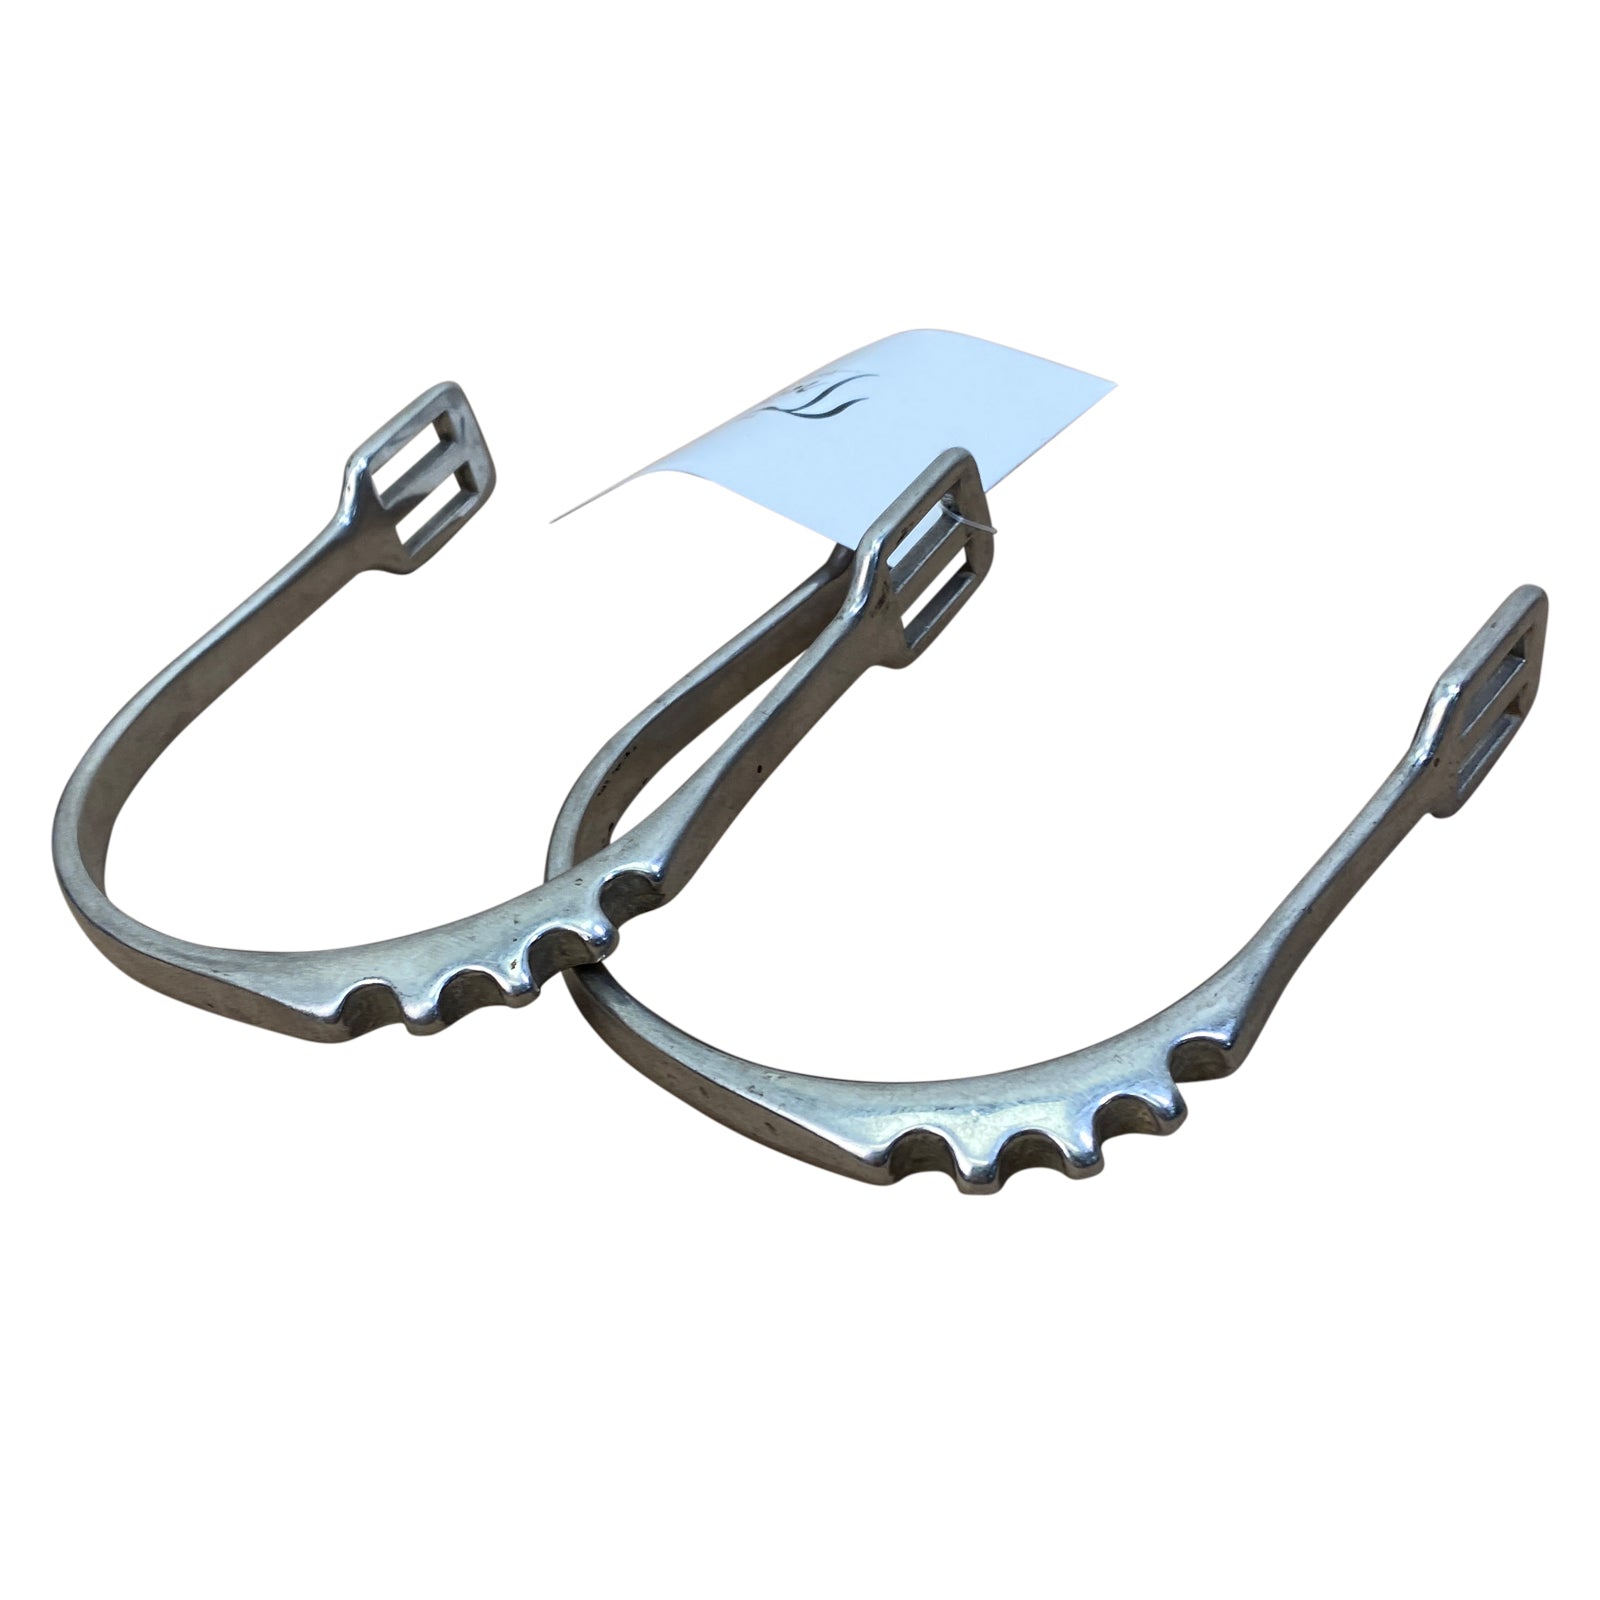 Centaur Le Spur in Stainess Steel